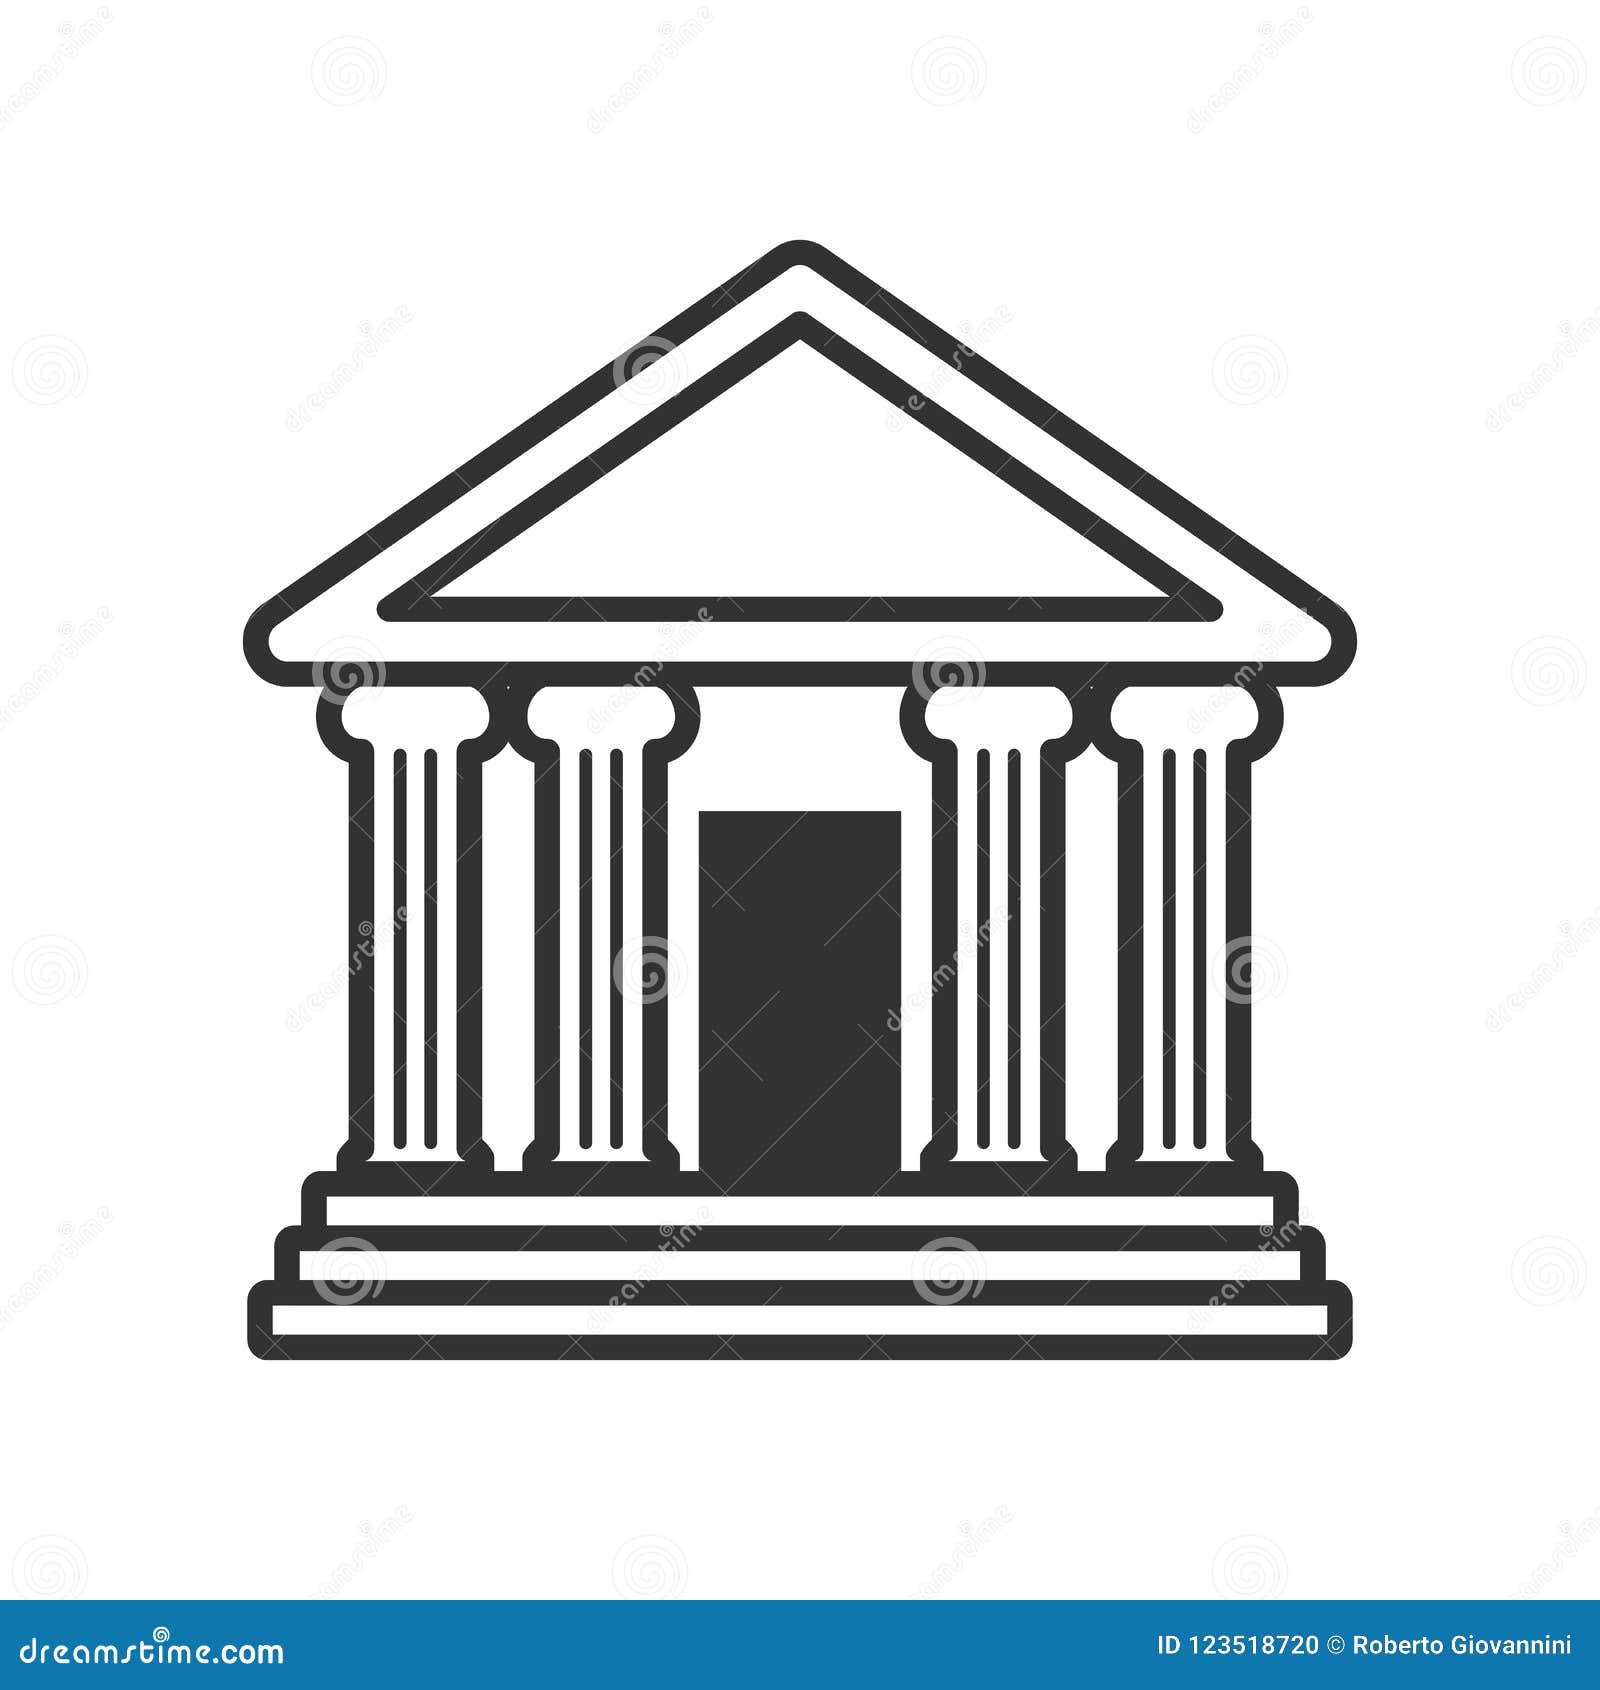 bank or temple with columns outline icon